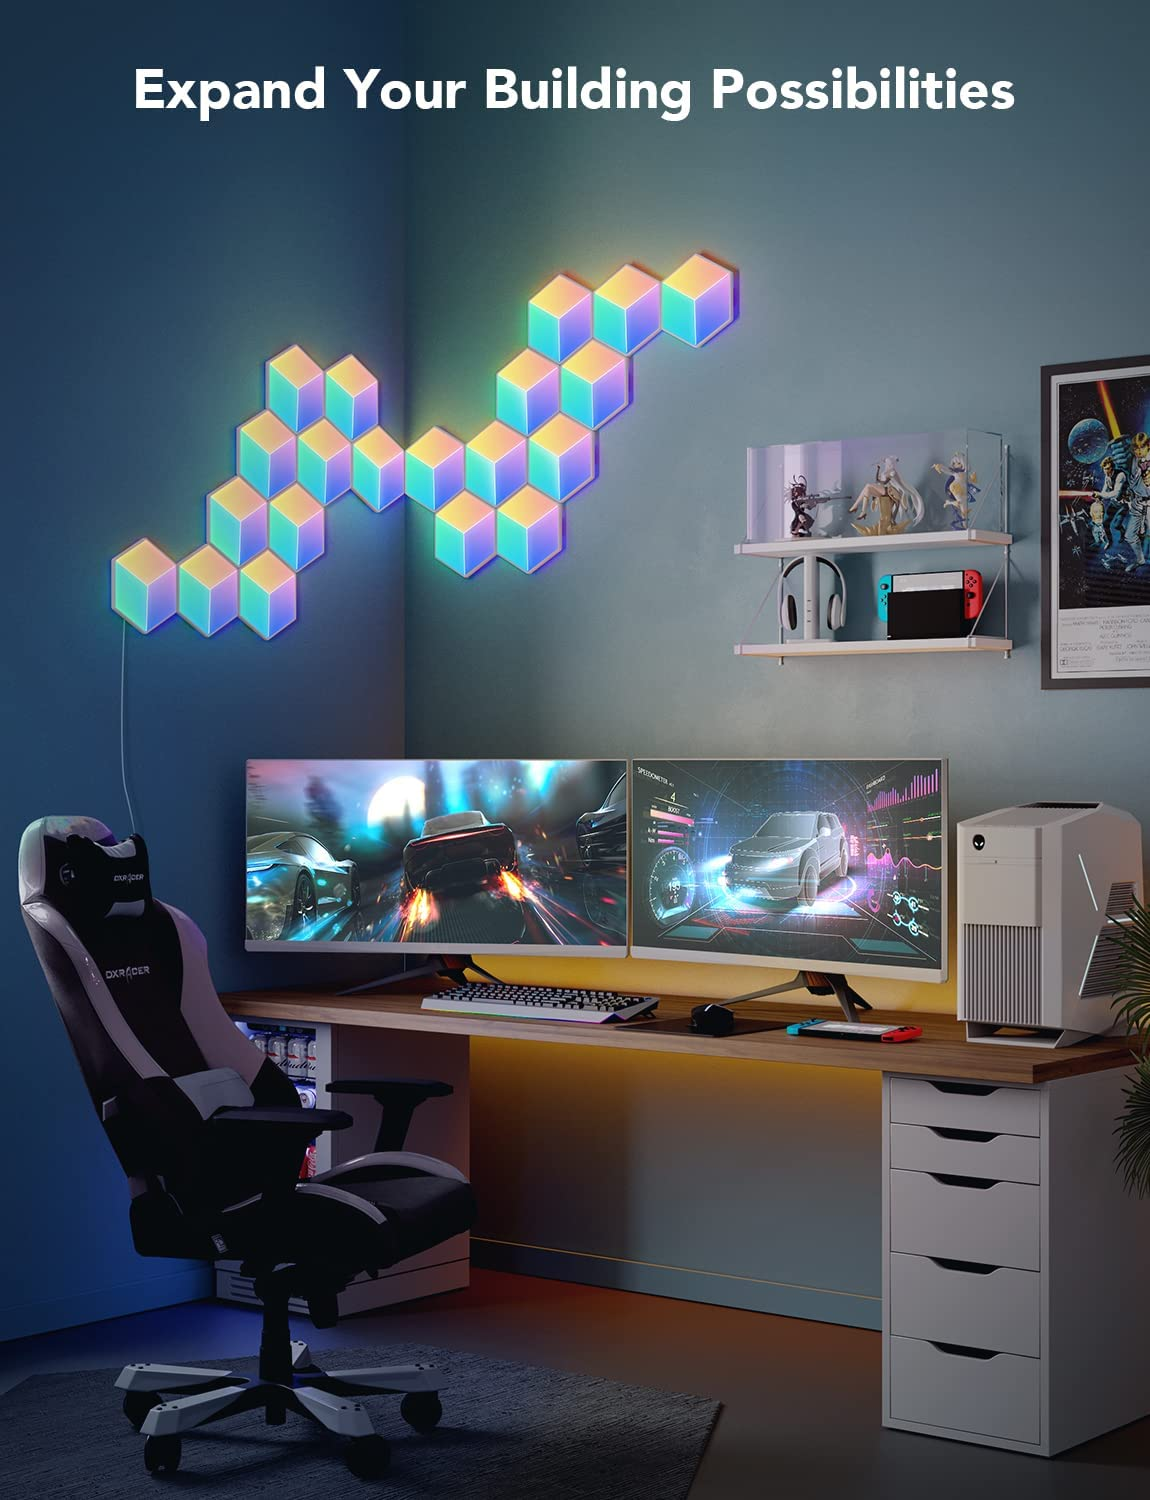 Govee Glide Hexa Pro Light Panels, RGBIC 3D Hexagon Wall Lights, Wi-Fi LED Creation Light with Music Sync, Works with Alexa Google Assistant for Living Room, Bedroom, Gaming Rooms, 10 Pack